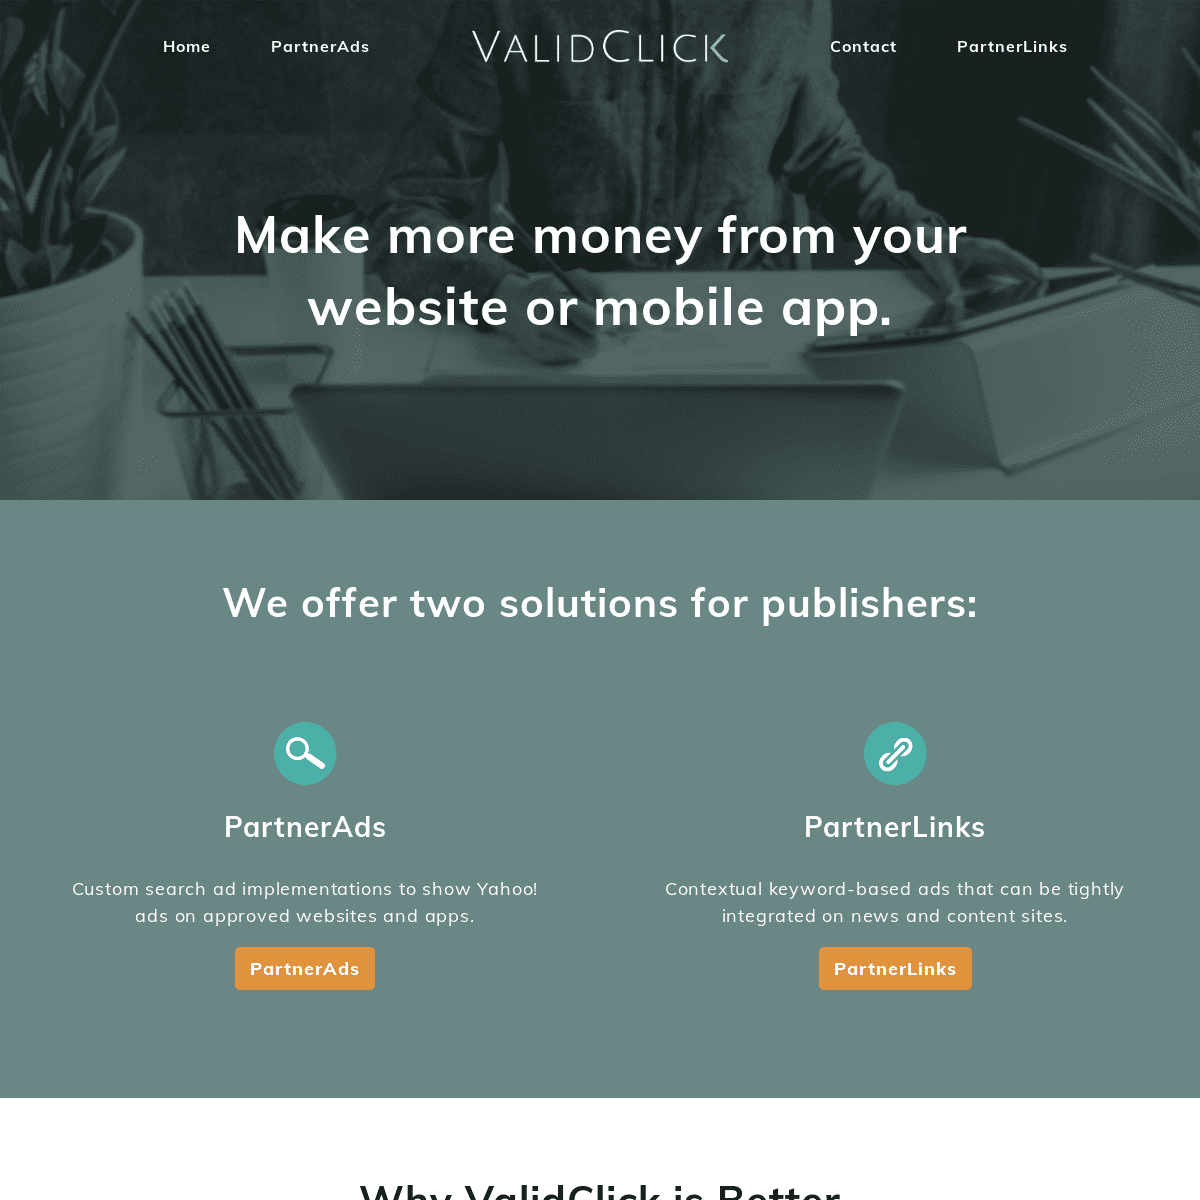 A complete backup of validclick.com